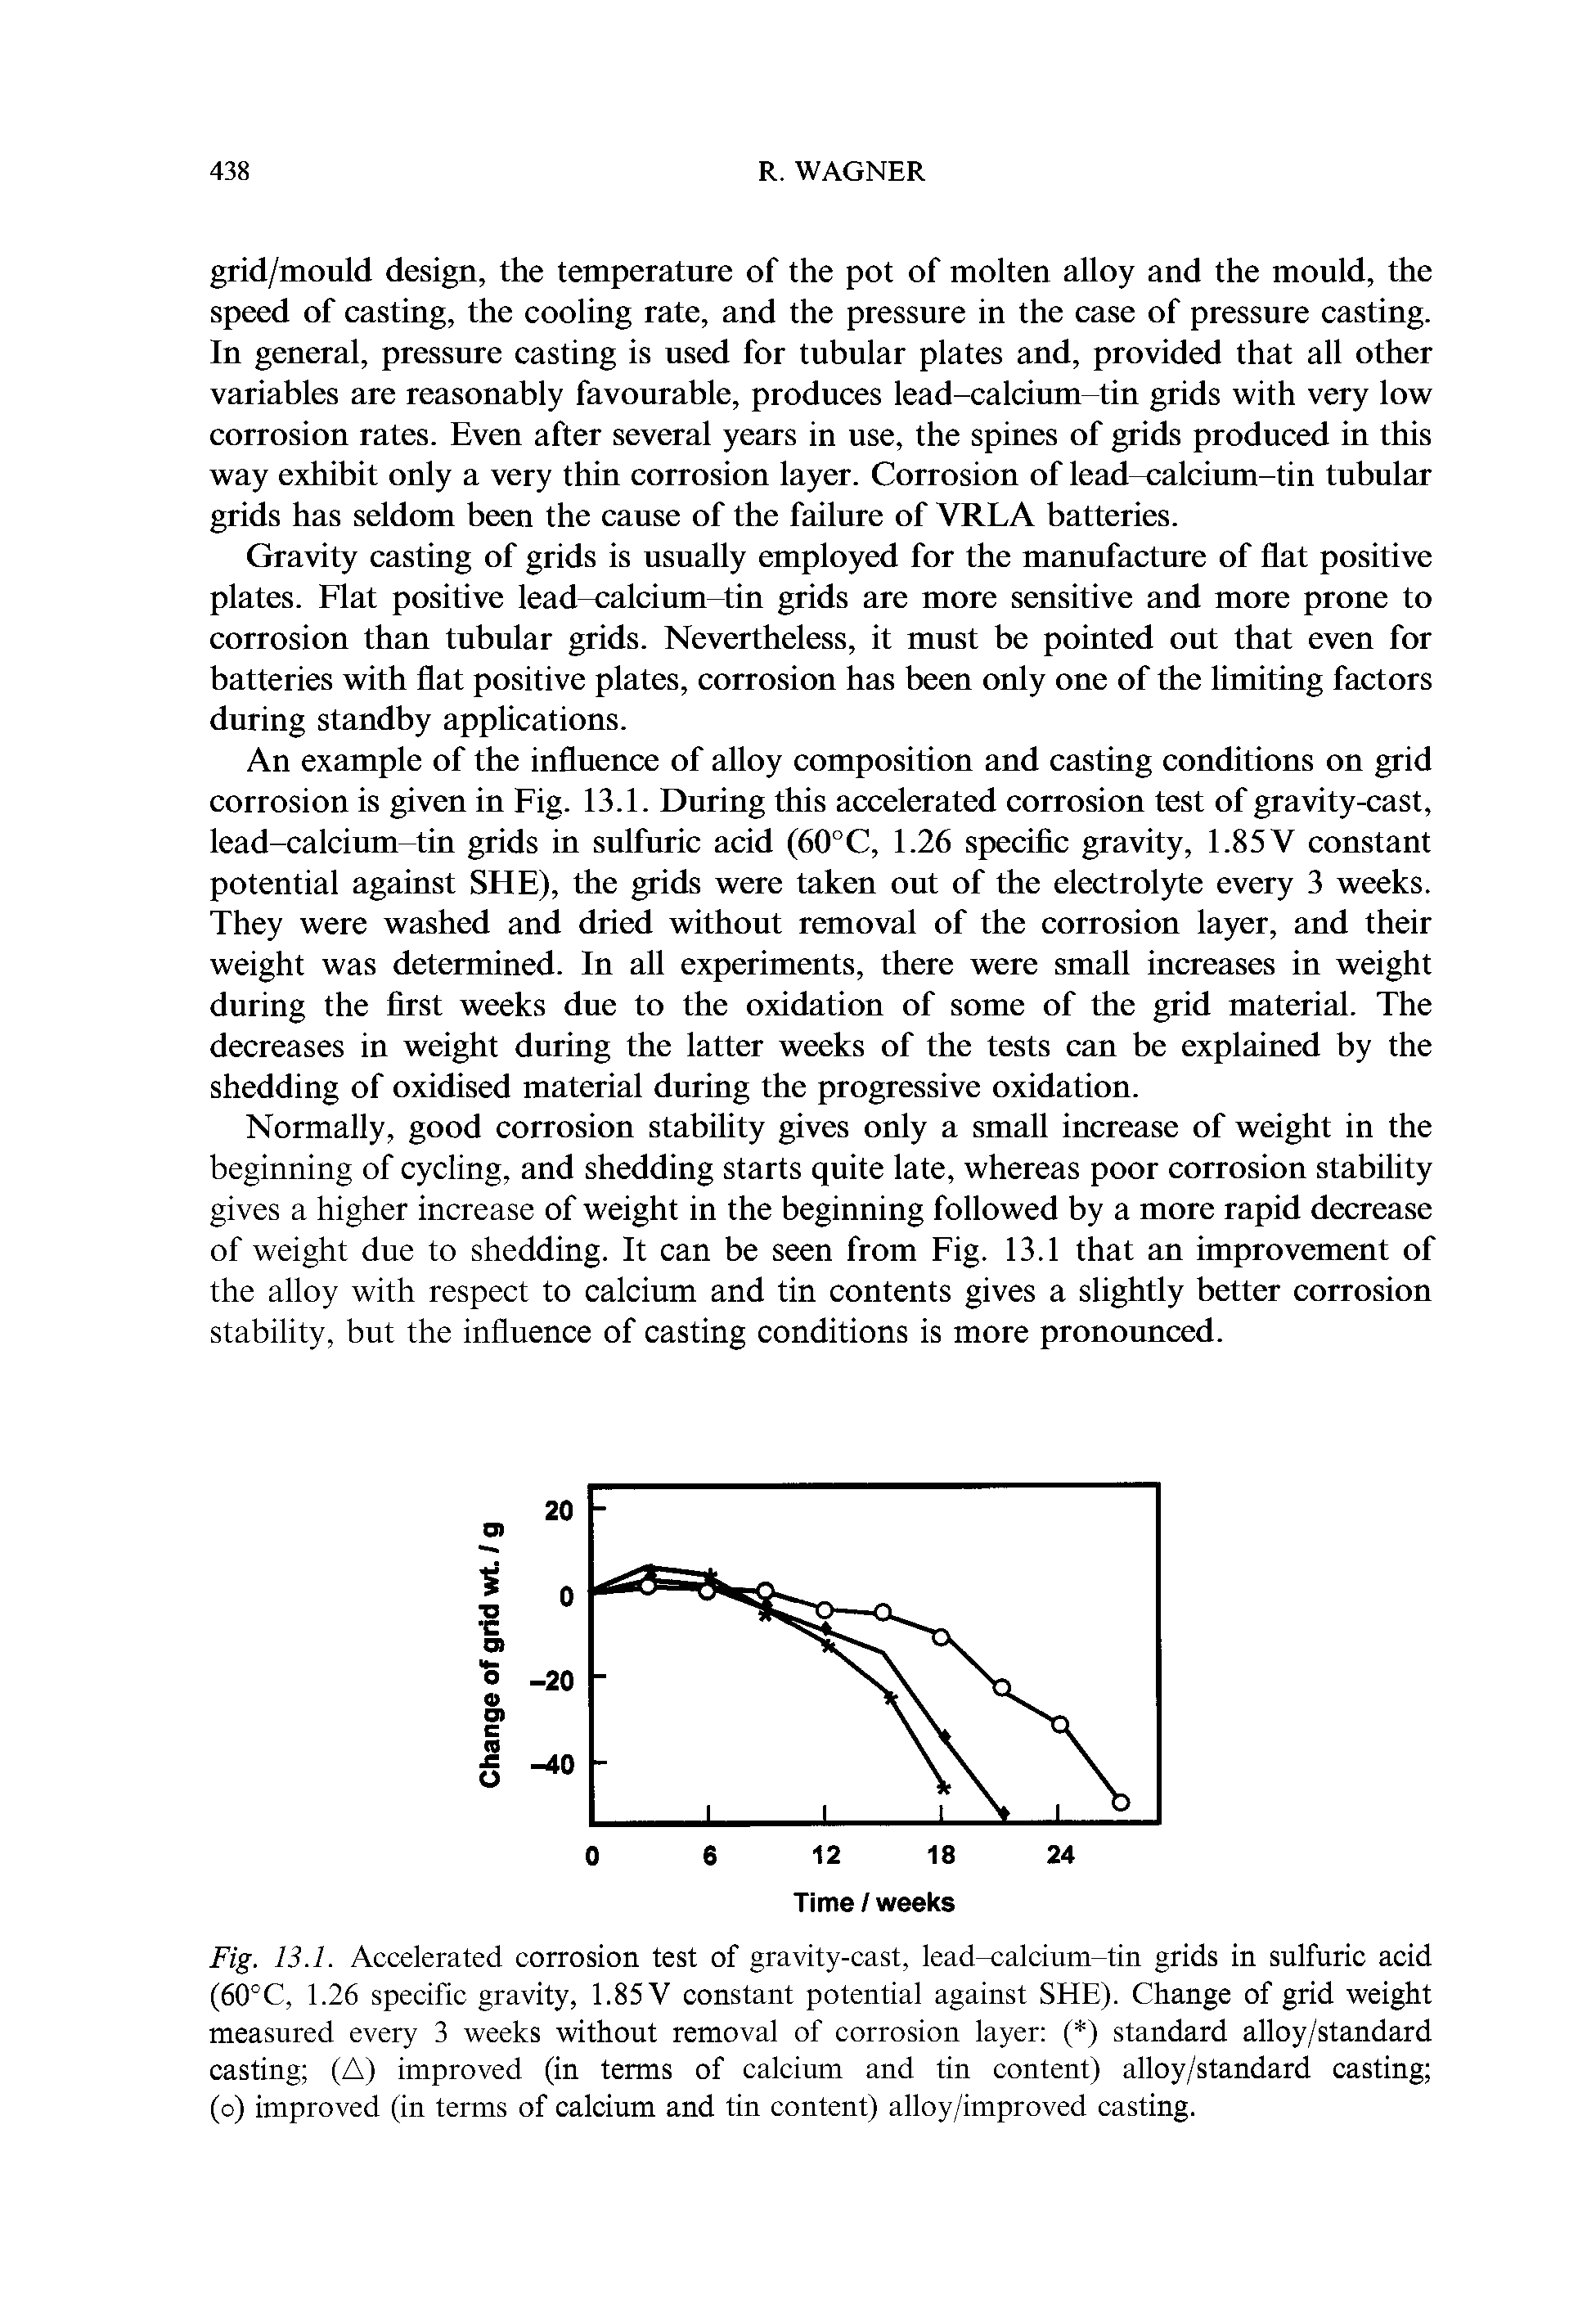 Fig. 13.1. Accelerated corrosion test of gravity-cast, lead-calcium-tin grids in sulfuric acid (60°C, 1.26 specific gravity, 1.85 V constant potential against SHE). Change of grid weight measured every 3 weeks without removal of corrosion layer ( ) standard alloy/standard casting (A) improved (in terms of calcium and tin content) alloy/standard casting (o) improved (in terms of calcium and tin content) alloy/improved casting.